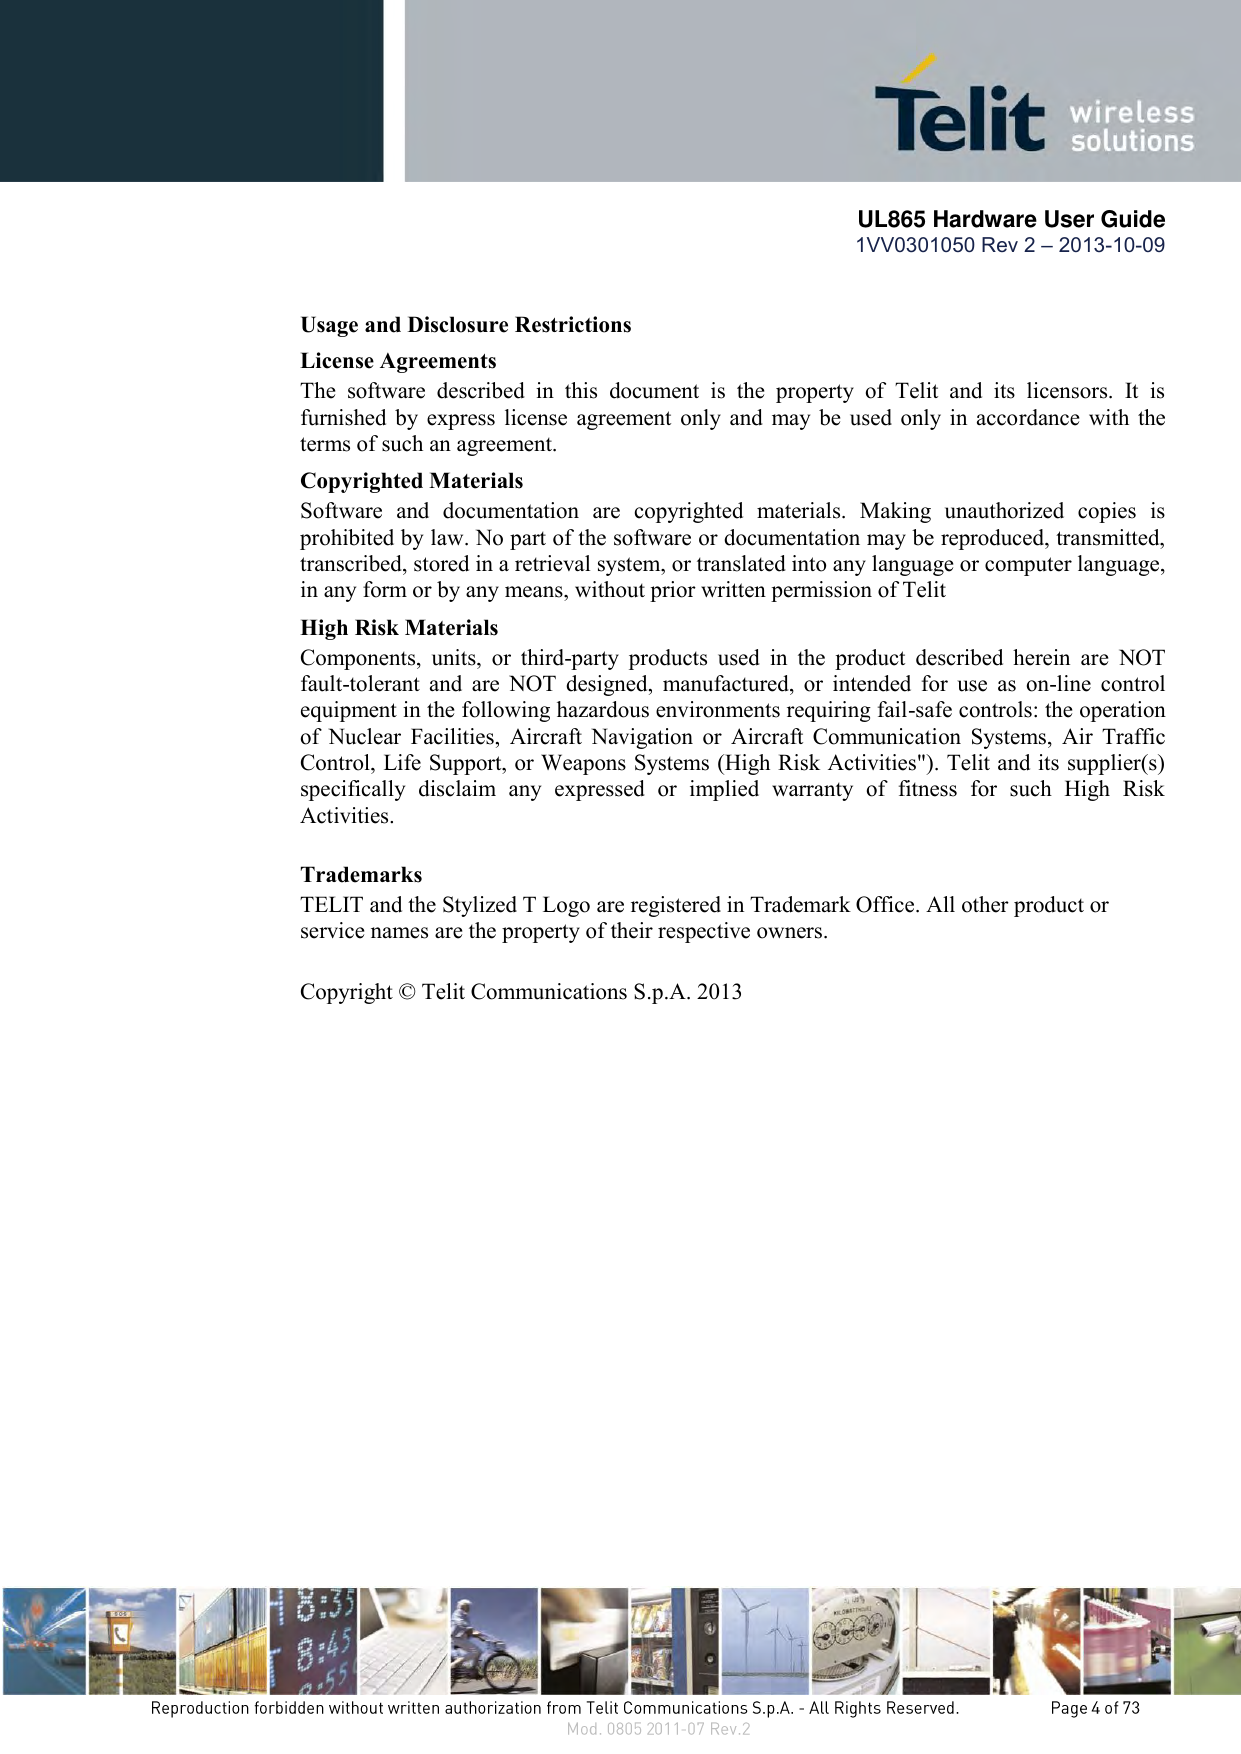       UL865 Hardware User Guide 1VV0301050 Rev 2 – 2013-10-09   Usage and Disclosure Restrictions License Agreements The  software  described  in  this  document  is  the  property  of  Telit  and  its  licensors.  It  is furnished by express license agreement only and may be  used only in accordance with the terms of such an agreement. Copyrighted Materials Software  and  documentation  are  copyrighted  materials.  Making  unauthorized  copies  is prohibited by law. No part of the software or documentation may be reproduced, transmitted, transcribed, stored in a retrieval system, or translated into any language or computer language, in any form or by any means, without prior written permission of Telit High Risk Materials Components,  units,  or  third-party  products  used  in  the  product  described  herein  are  NOT fault-tolerant  and  are  NOT  designed,  manufactured,  or  intended  for  use  as  on-line  control equipment in the following hazardous environments requiring fail-safe controls: the operation of  Nuclear  Facilities,  Aircraft  Navigation  or  Aircraft  Communication  Systems,  Air  Traffic Control, Life Support, or Weapons Systems (High Risk Activities&quot;). Telit and its supplier(s) specifically  disclaim  any  expressed  or  implied  warranty  of  fitness  for  such  High  Risk Activities. Trademarks TELIT and the Stylized T Logo are registered in Trademark Office. All other product or service names are the property of their respective owners.   Copyright © Telit Communications S.p.A. 2013  